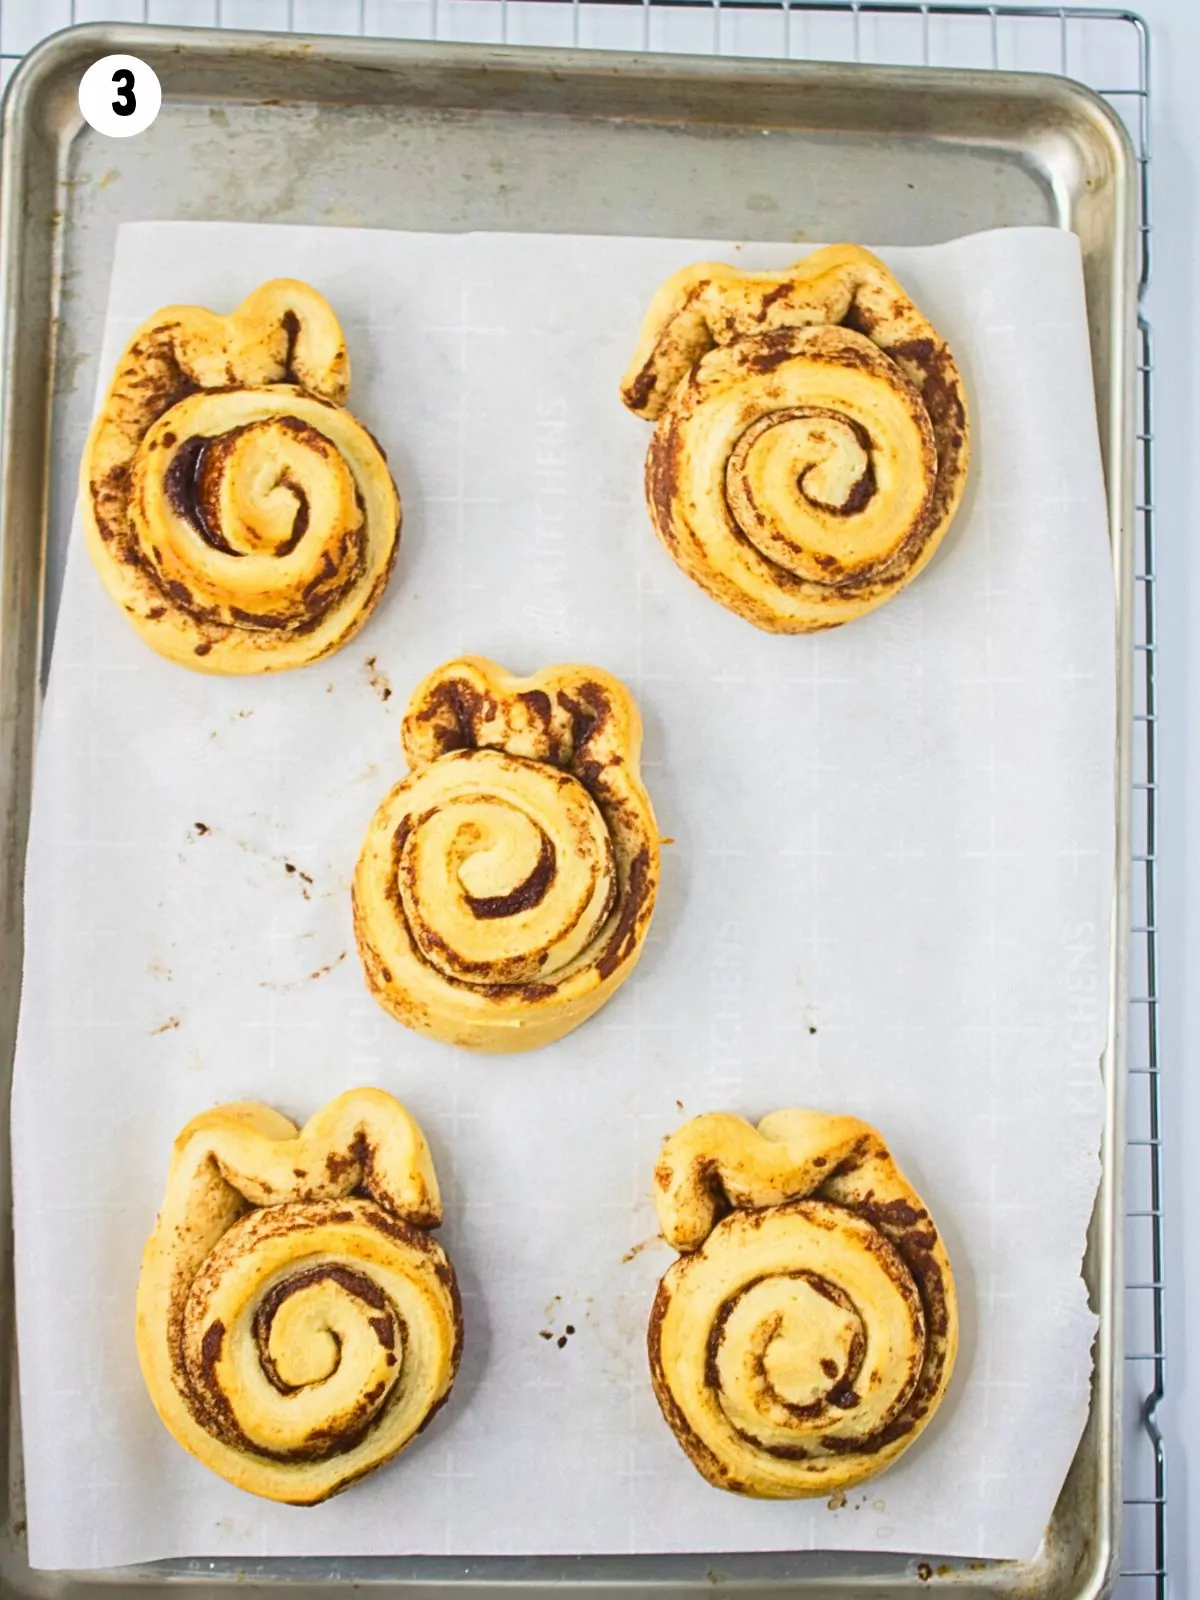 baked cinnamon rolls on tray with parchment paper.